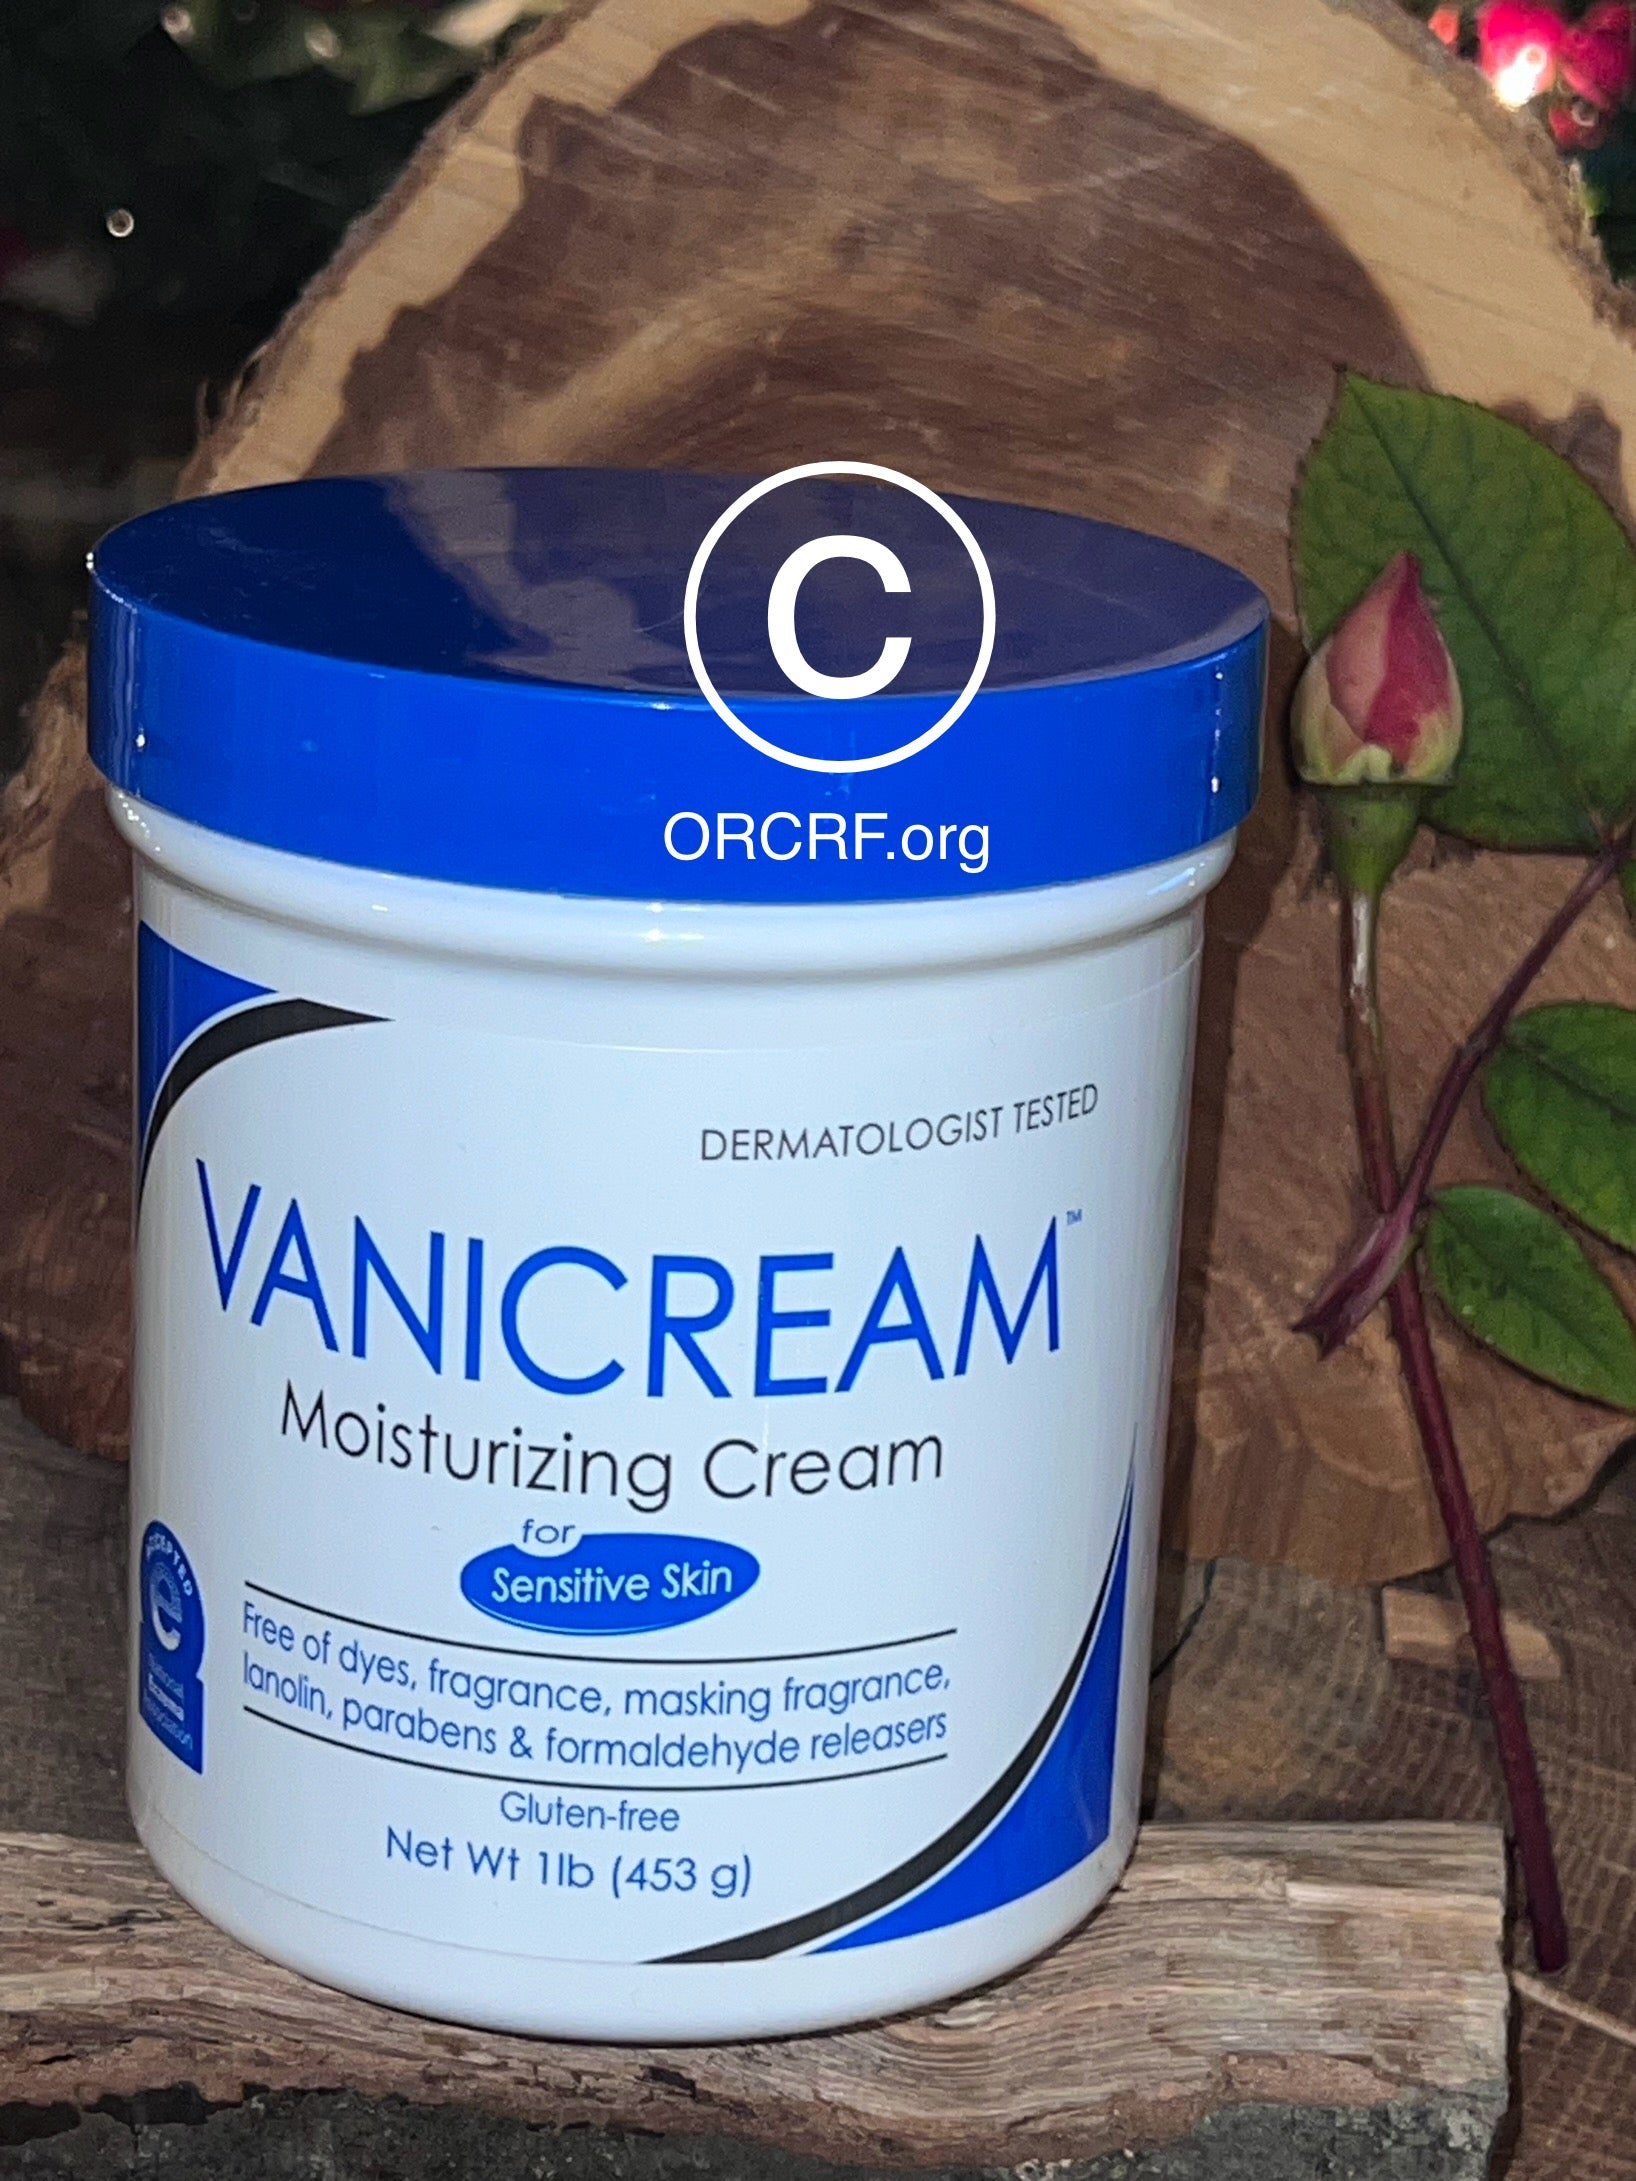 Vanicream MOISTURIZING SKIN CREAM REFILL for SENSITIVE SKIN - 16 fl oz (1 lb) - Moisturizer Formulated Without Common Irritants for Those with Sensitive Skin - Supporting ORCRF.org